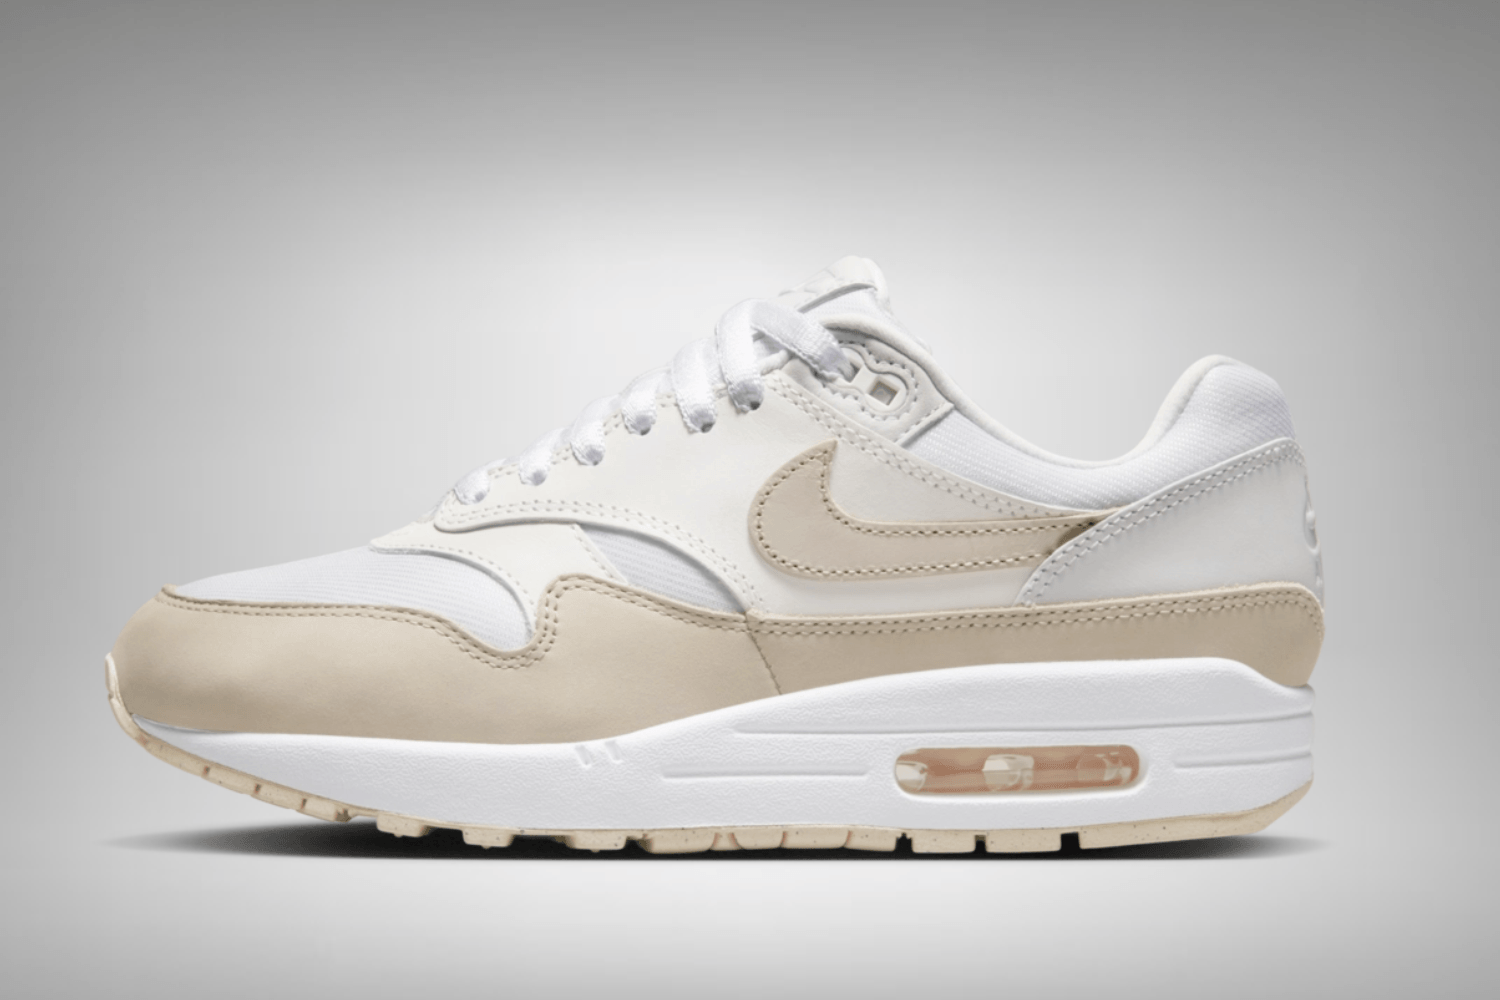 Nike Air Max 1 WMNS gets 'White Tan' colorway